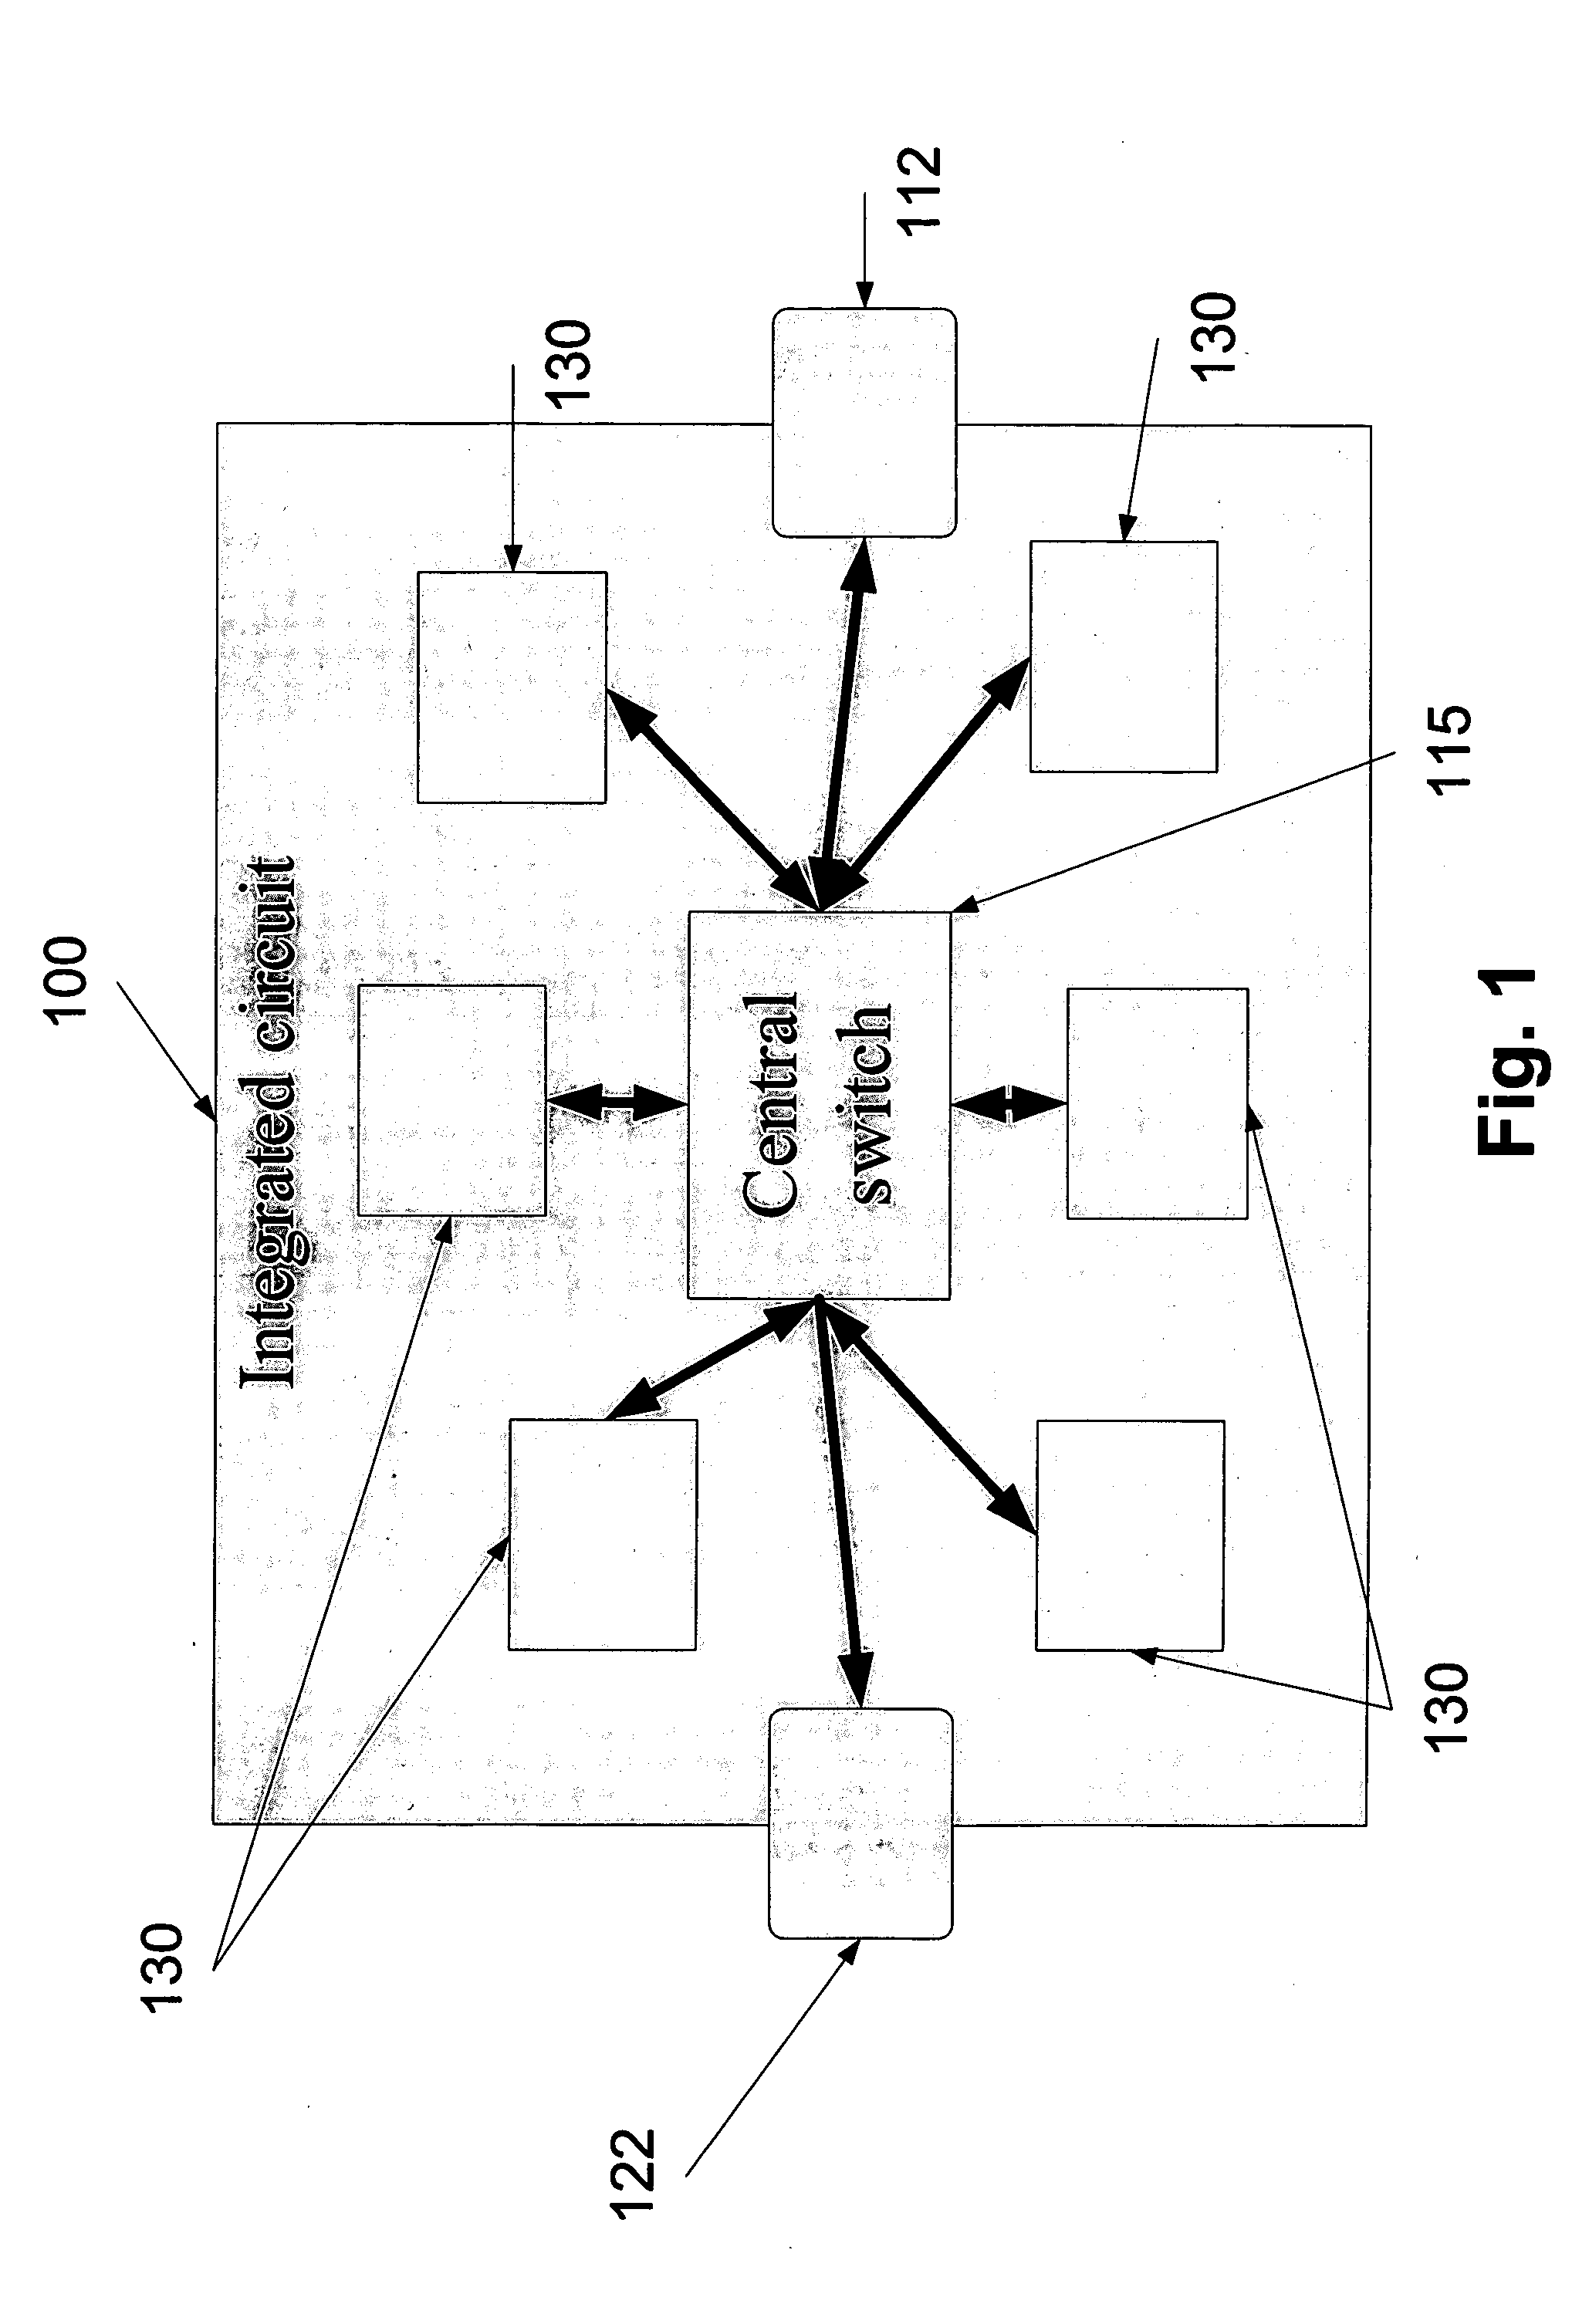 Integrated circuit, an encoder/decoder architecture, and a method for processing a media stream